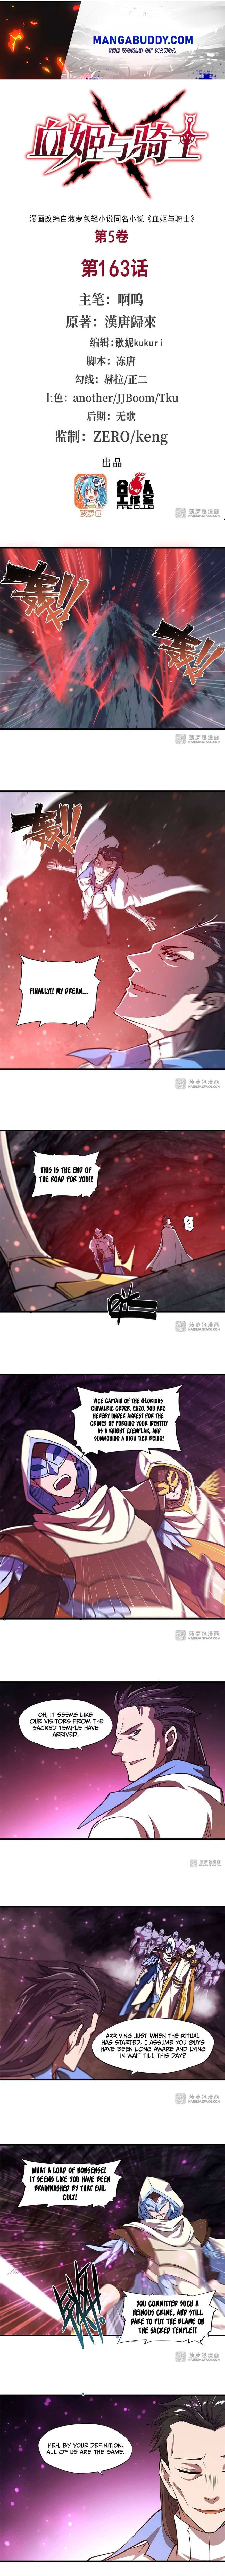 Vampires And Knight - Page 1